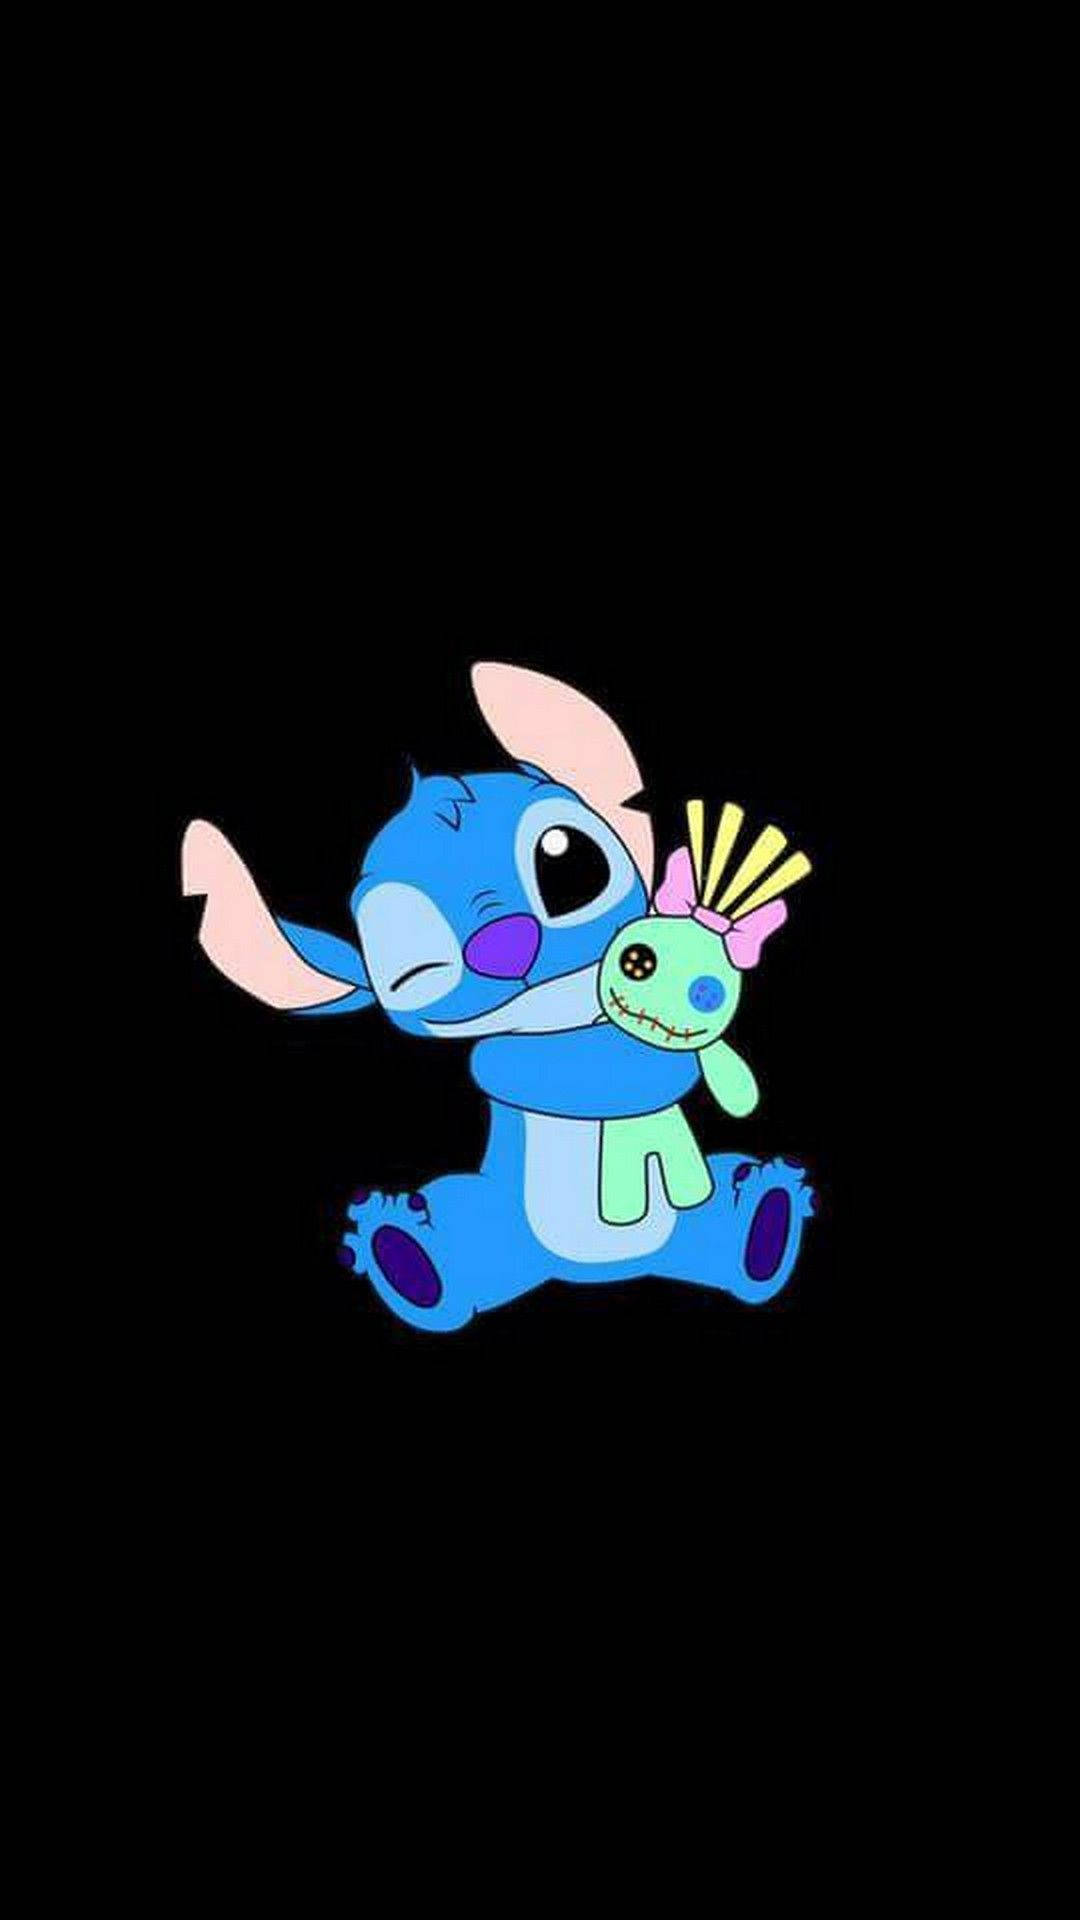 Stitch and Scrump together for a heartwarming friendship Wallpaper